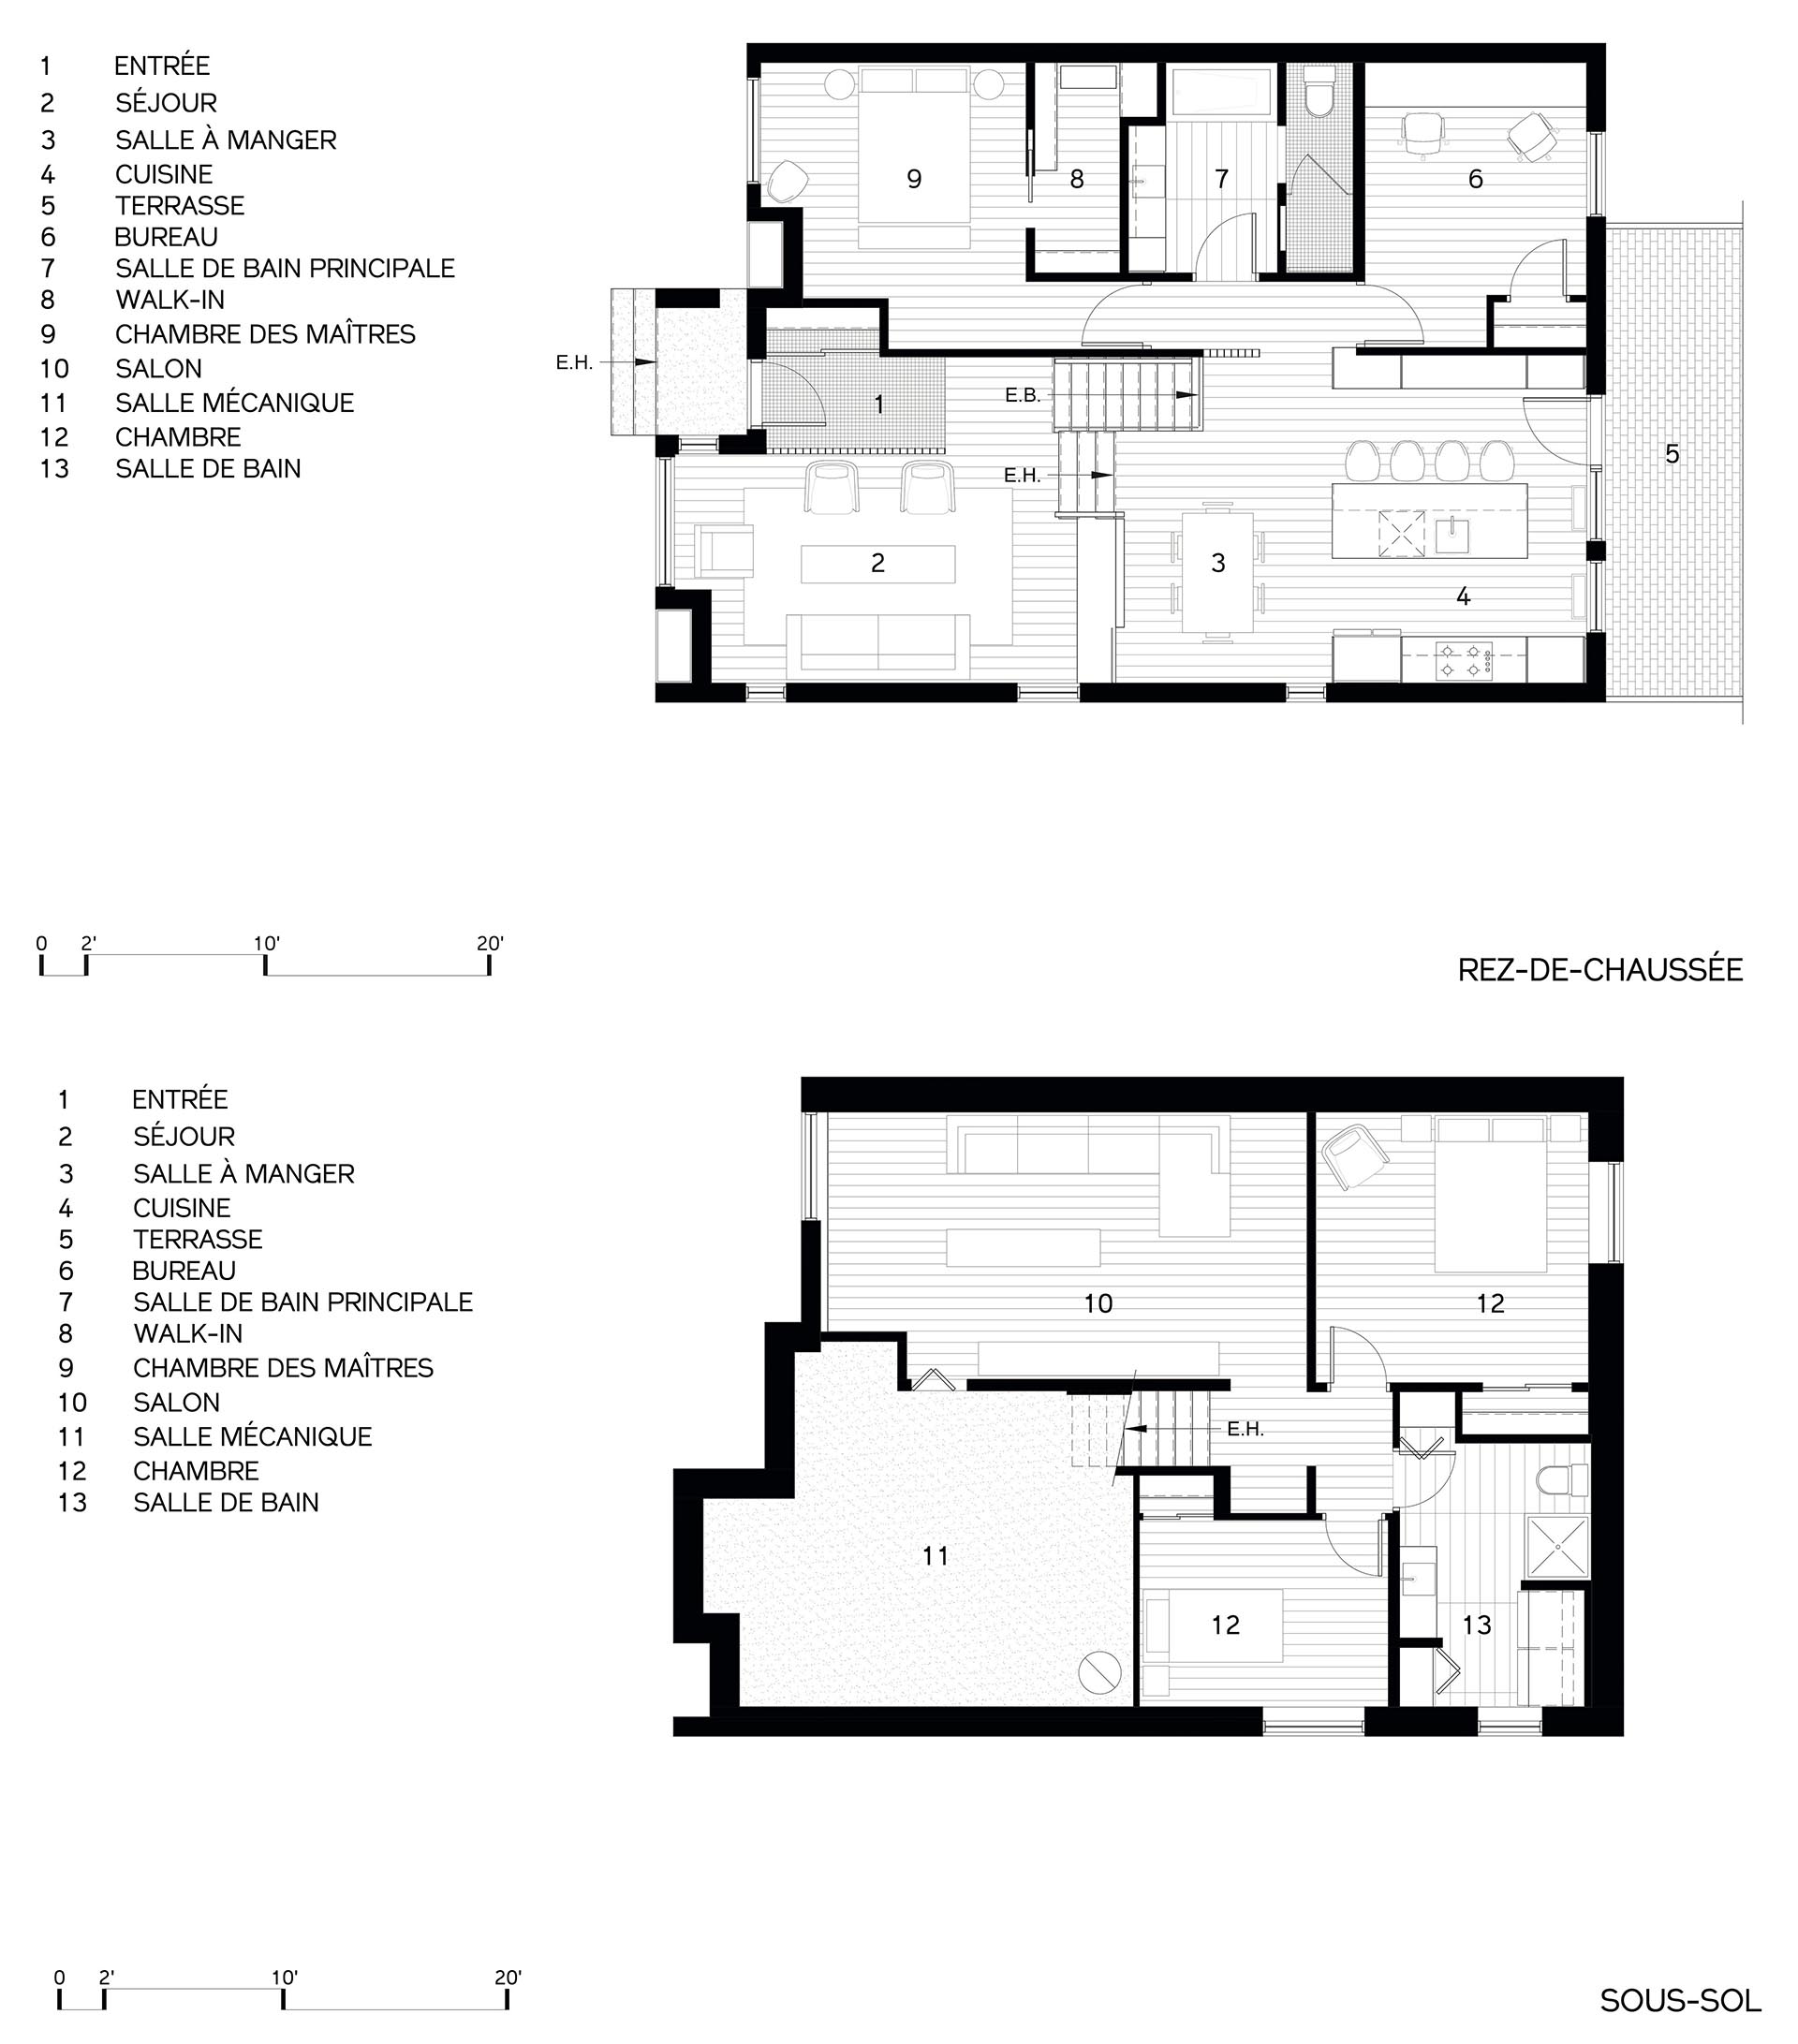 The floor plan of a split-level home.